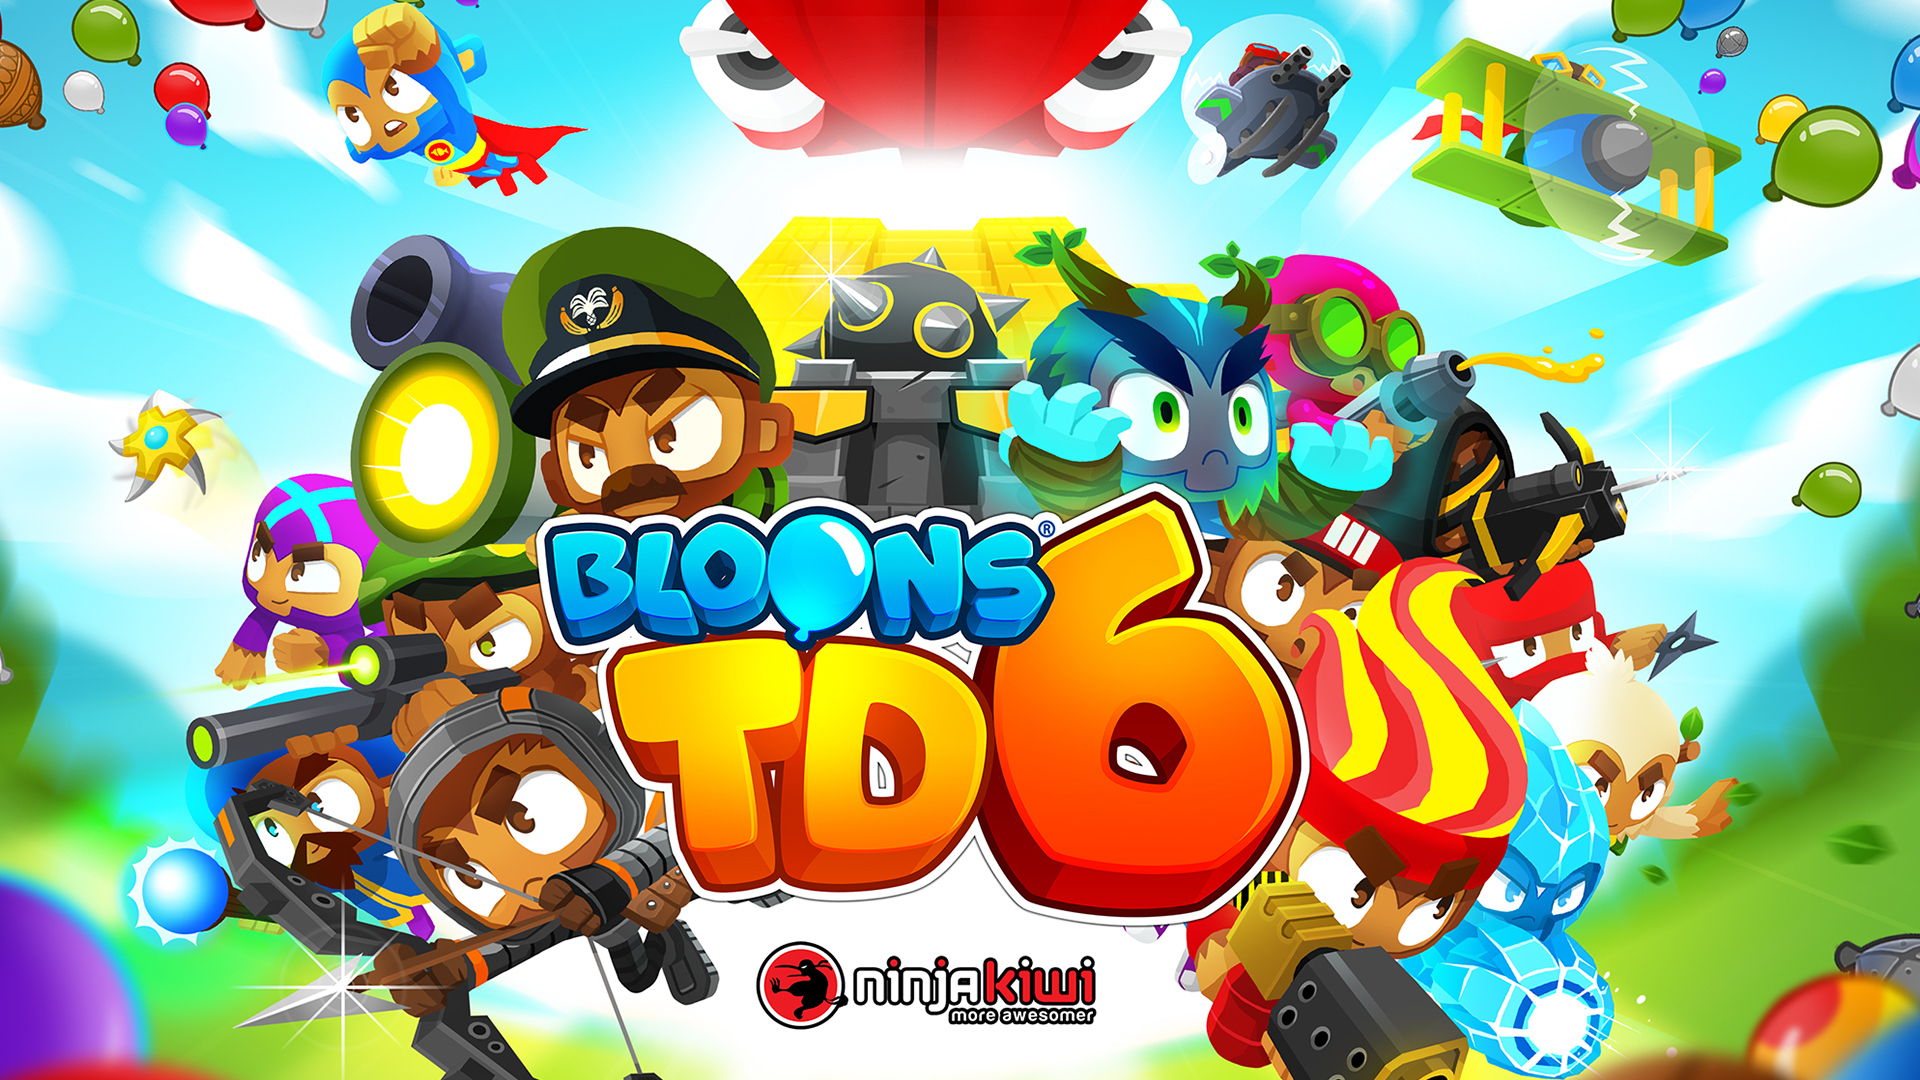 bloons tower defense 5 cooler math games